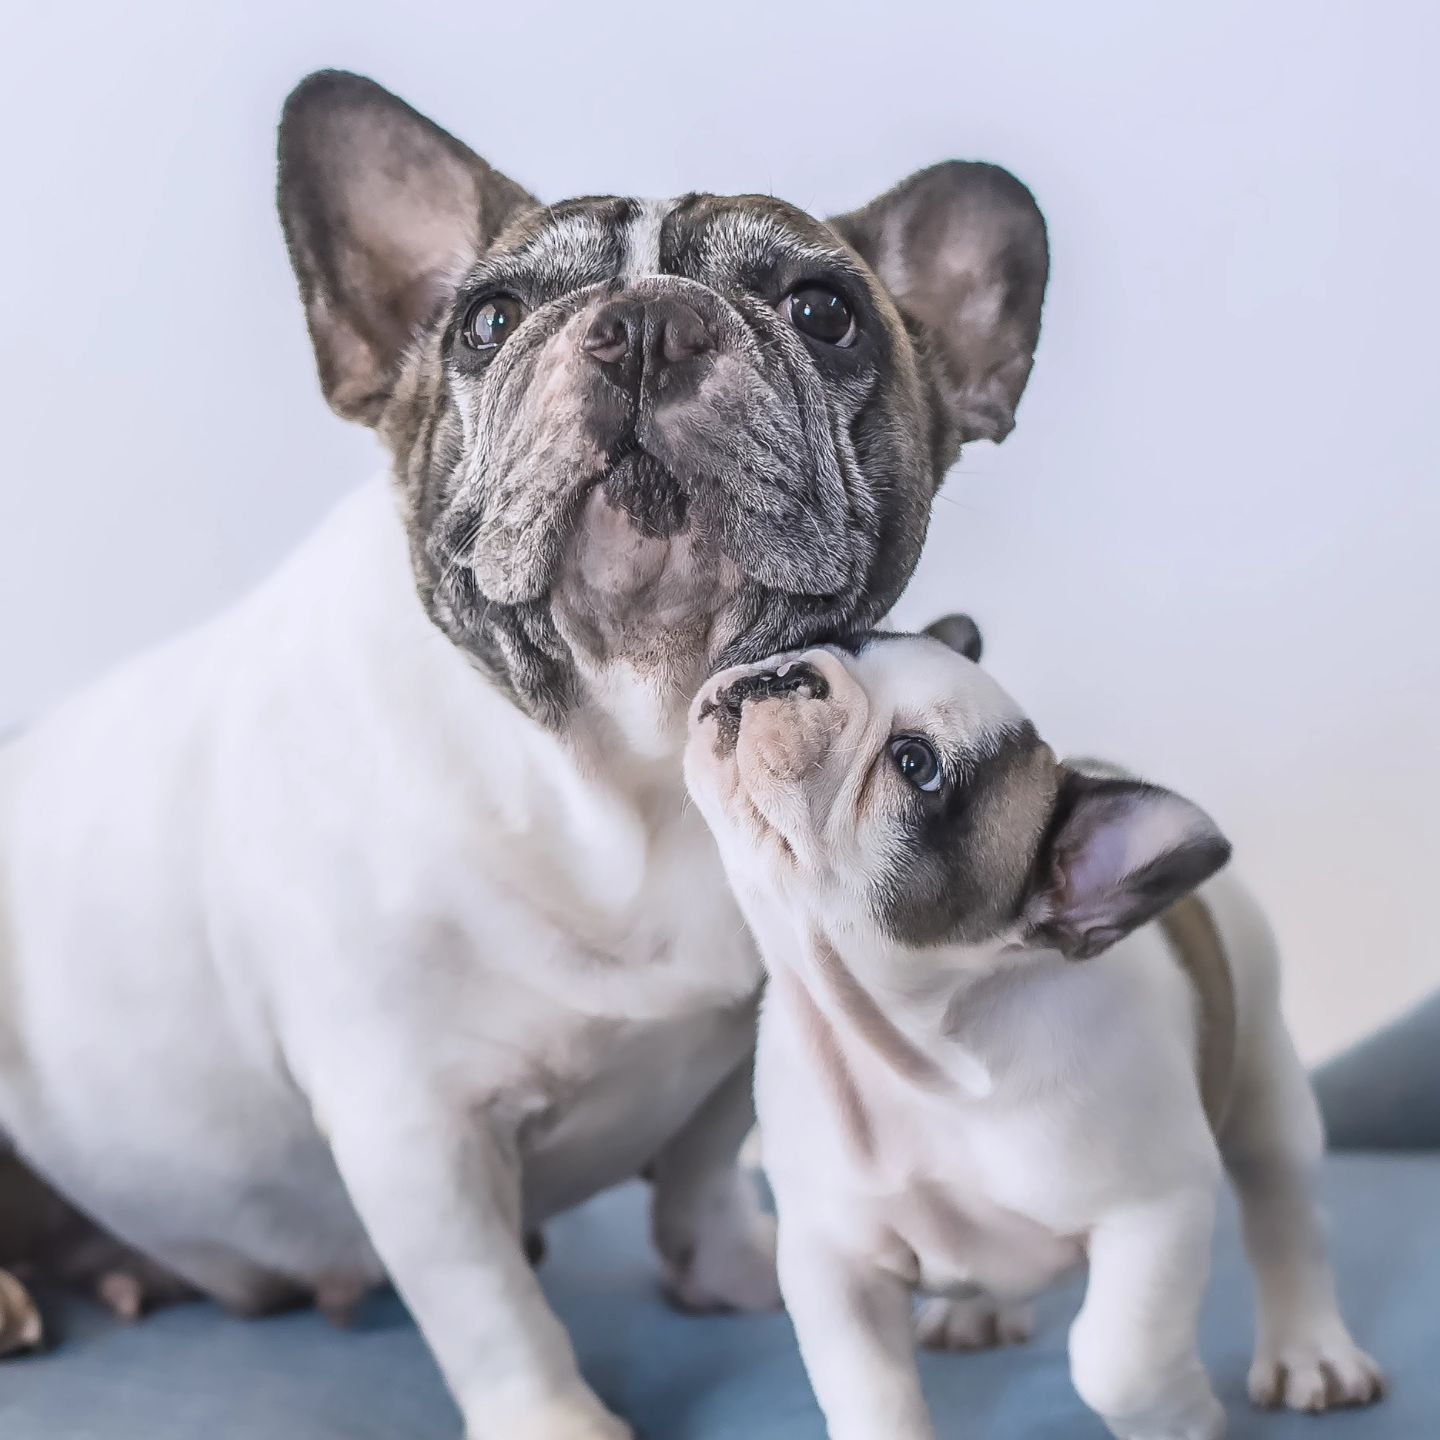 Happy Mother's Day 💐💞 from all of us here at Top Paw Frenchies 🐾 We hope your day is filled with  lots of love and relaxation. ❤️😌
.
.
.
#mothersday #puppylove #puppies #dogs #doglife #doglovers #cutepuppy #frenchbulldog #toppawfrenchies #puppyof